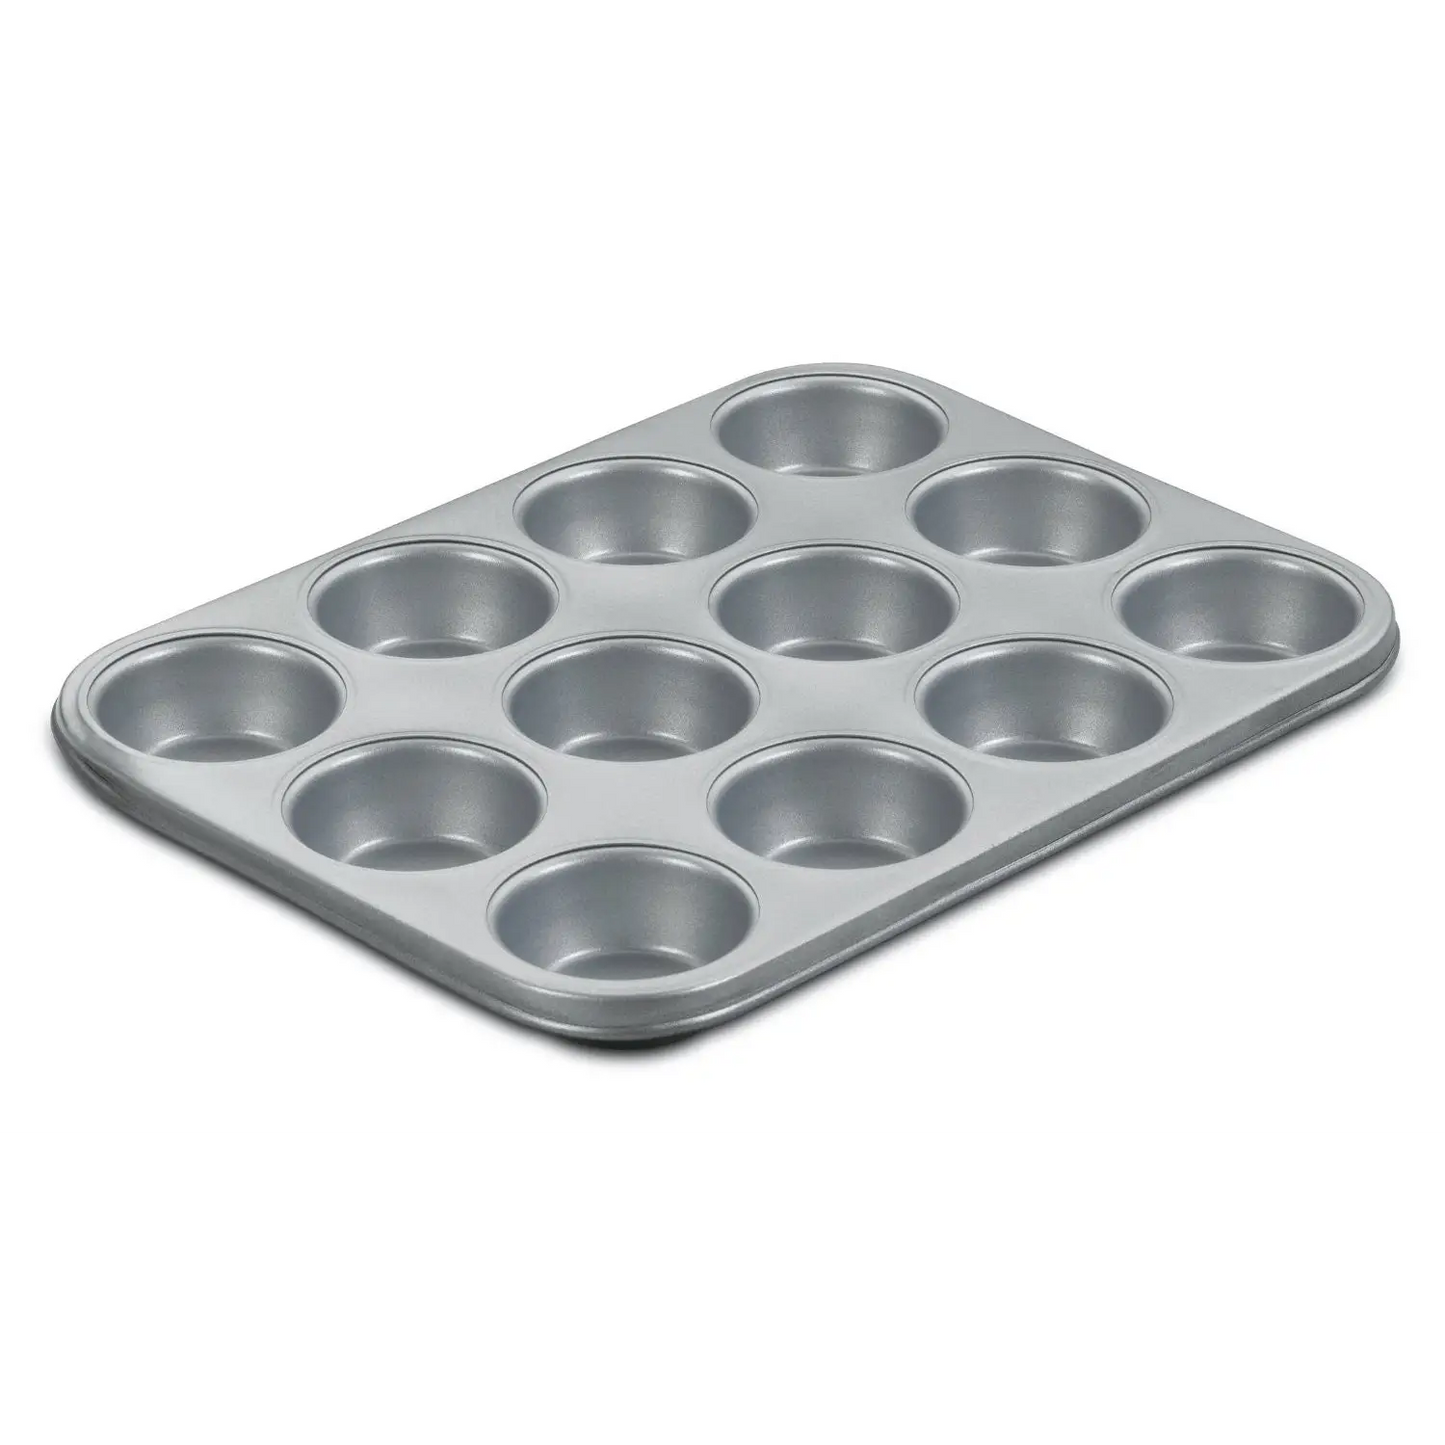 Cuisinart Chef’s Classic Nonstick Bakeware 12-Cup Muffin Pan